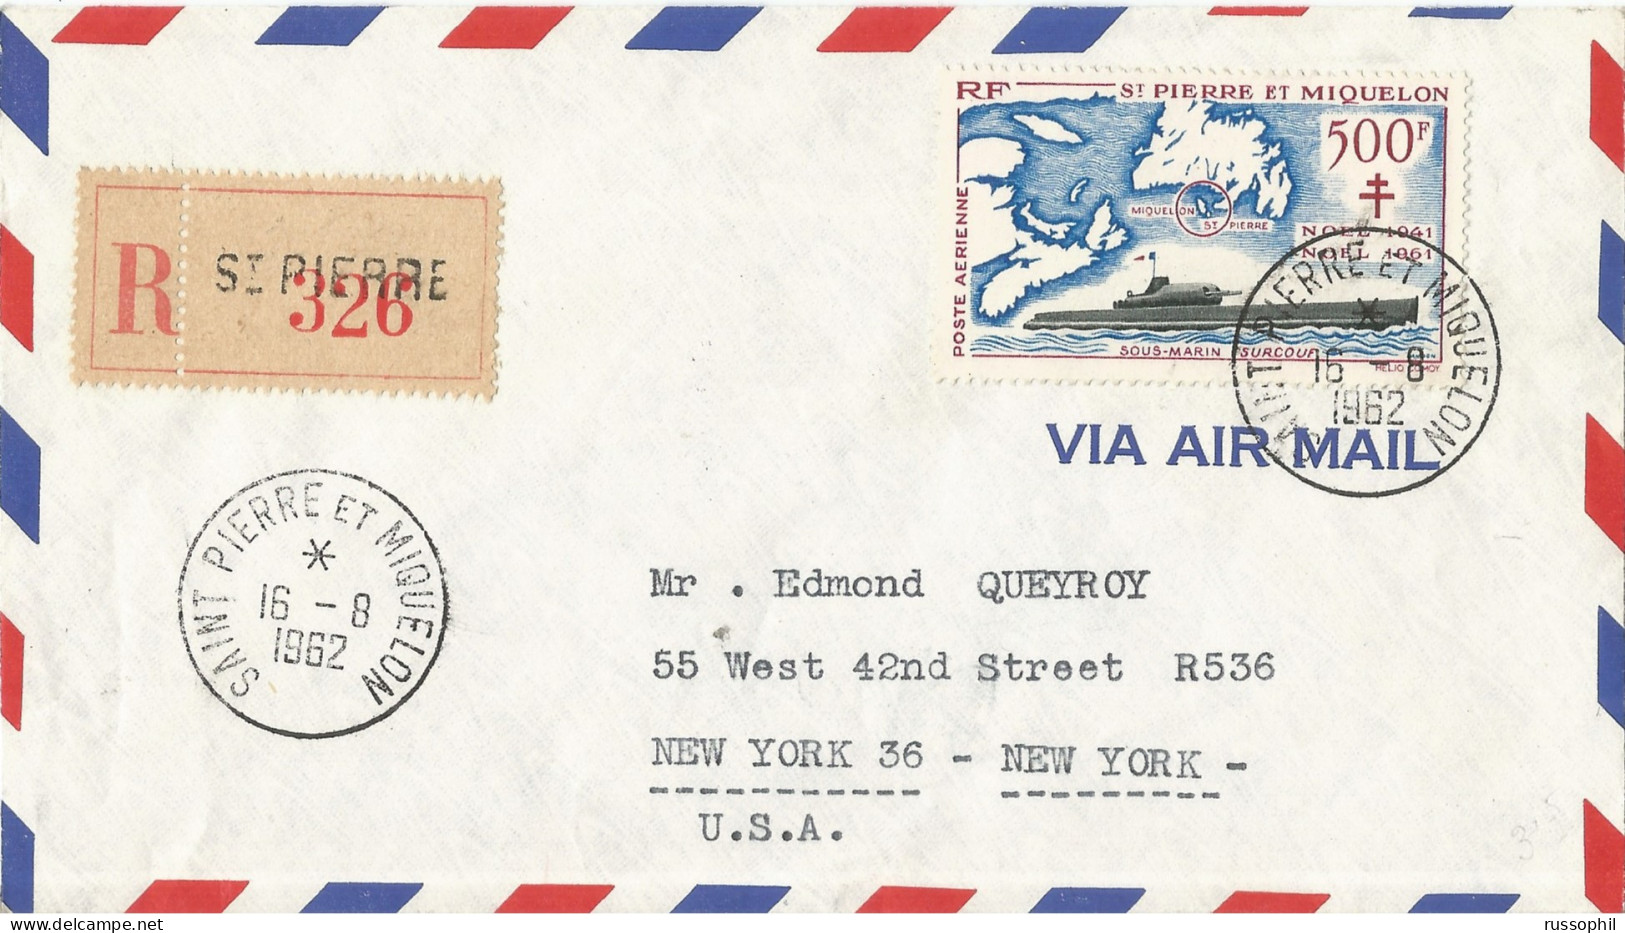 SAINT PIERRE ET MIQUELON - 500 FR (Yv. #PA28 ALONE) FRANKING ON AIR MAILED REGISTERED COVER TO THE USA - 1962 - Briefe U. Dokumente